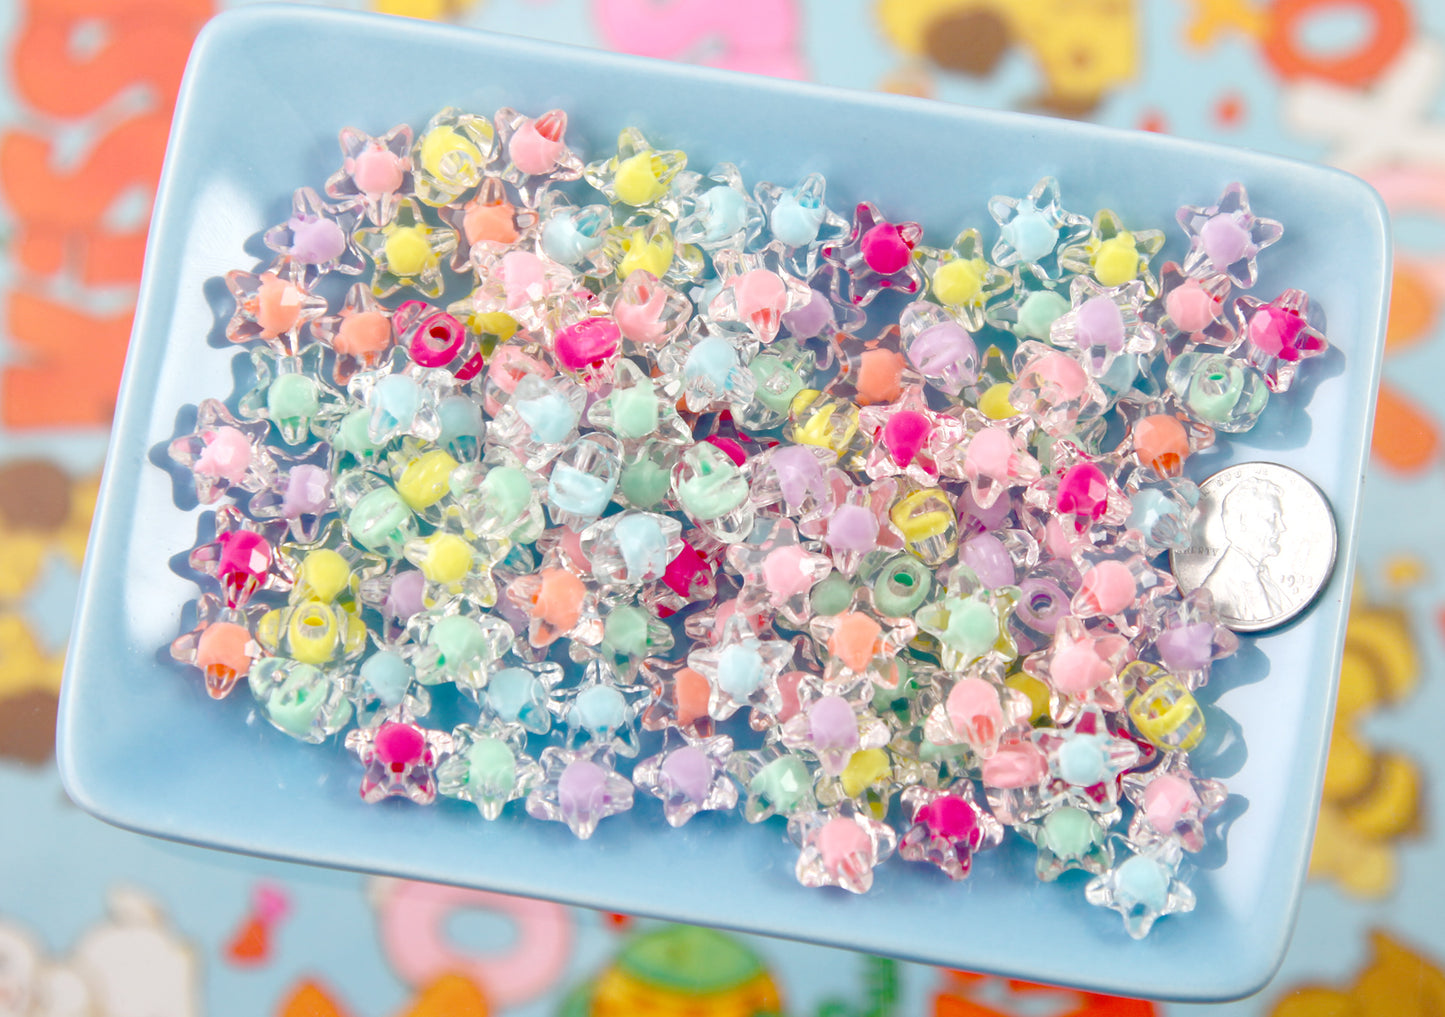 Pastel Star Beads - 12mm Small Pastel Shiny Acrylic Star Beads with Inner Bead - Cute Colorful Little Resin Star Beads - 150 pc set